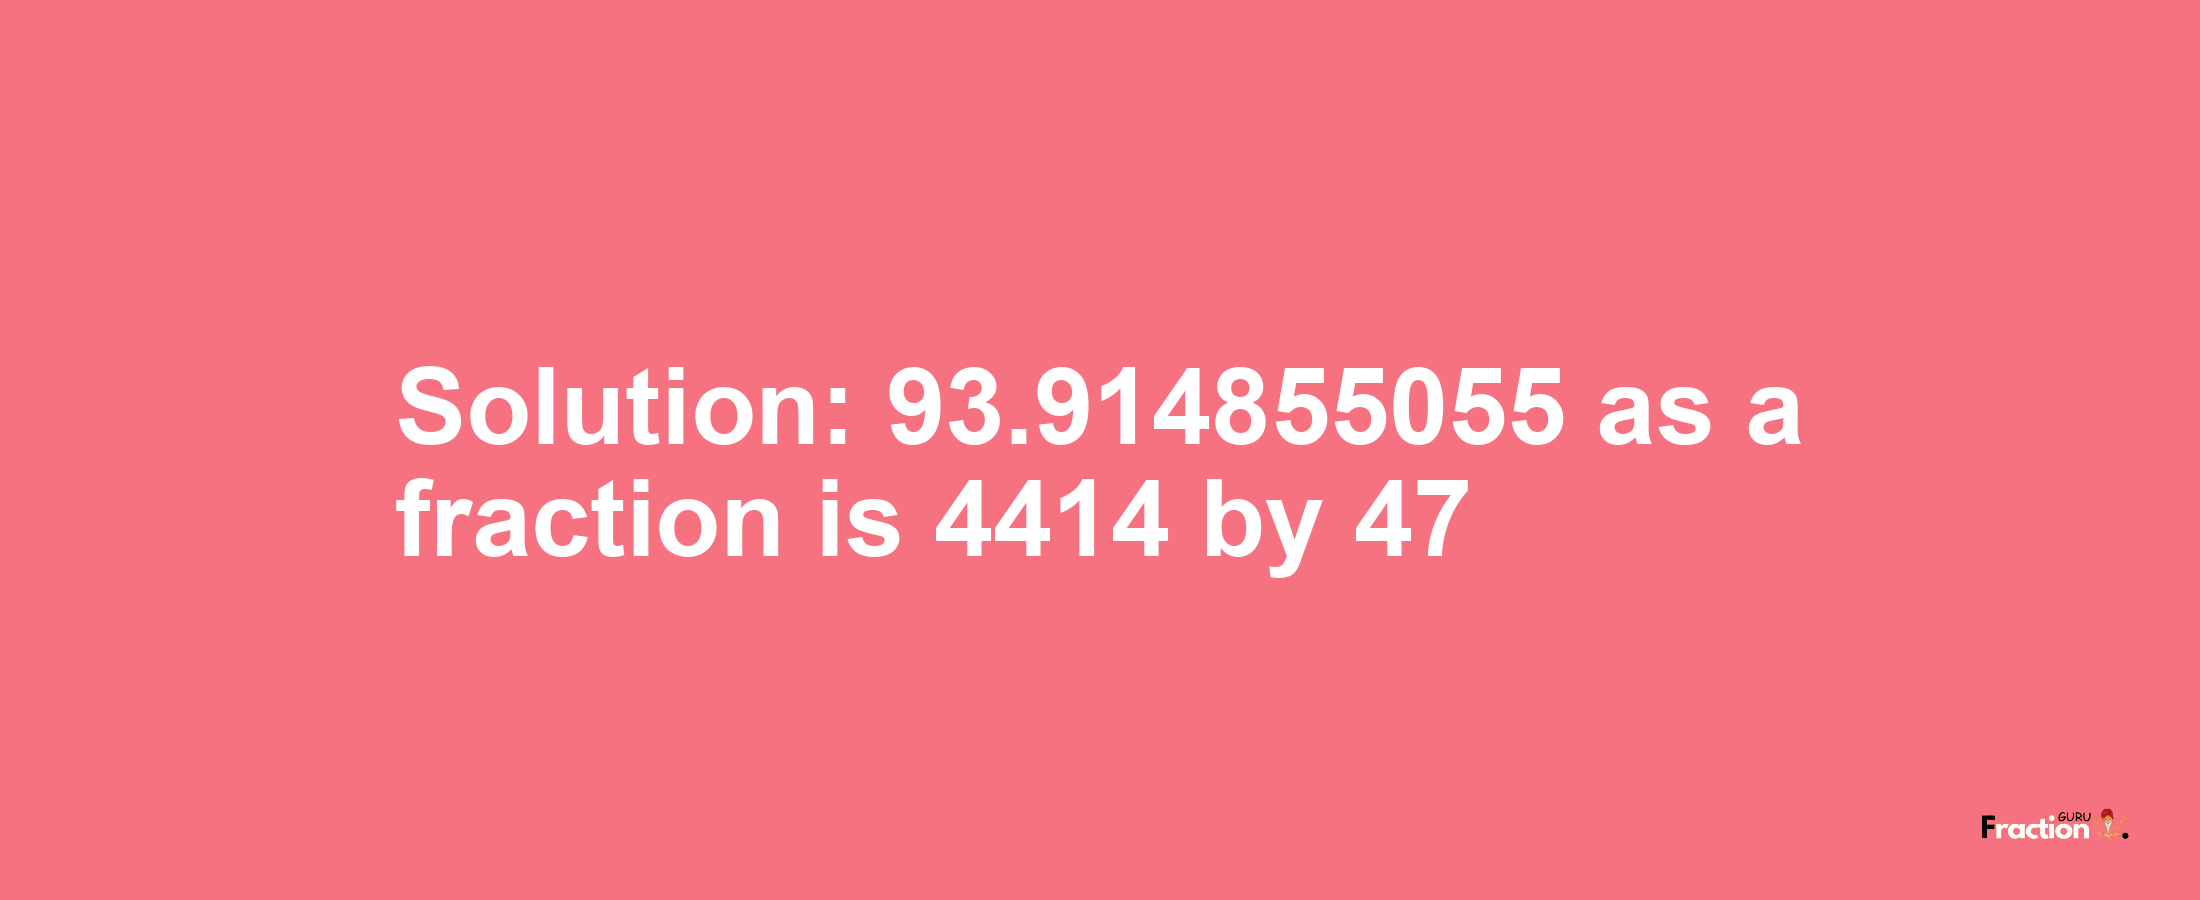 Solution:93.914855055 as a fraction is 4414/47